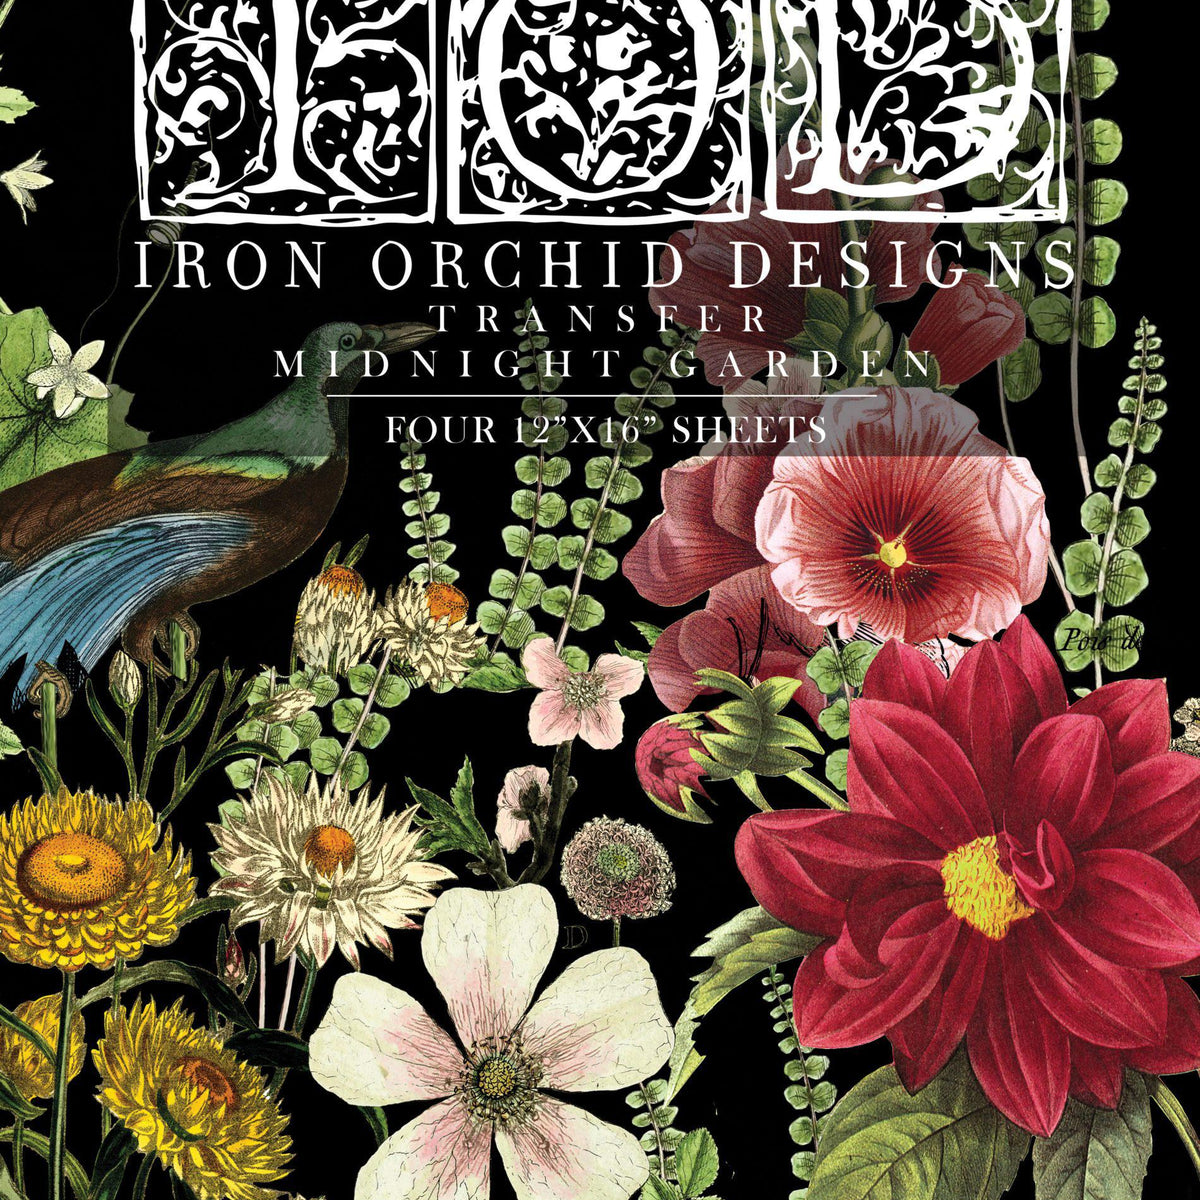 Midnight Garden-IOD Furniture Transfers by Iron Orchid Designs